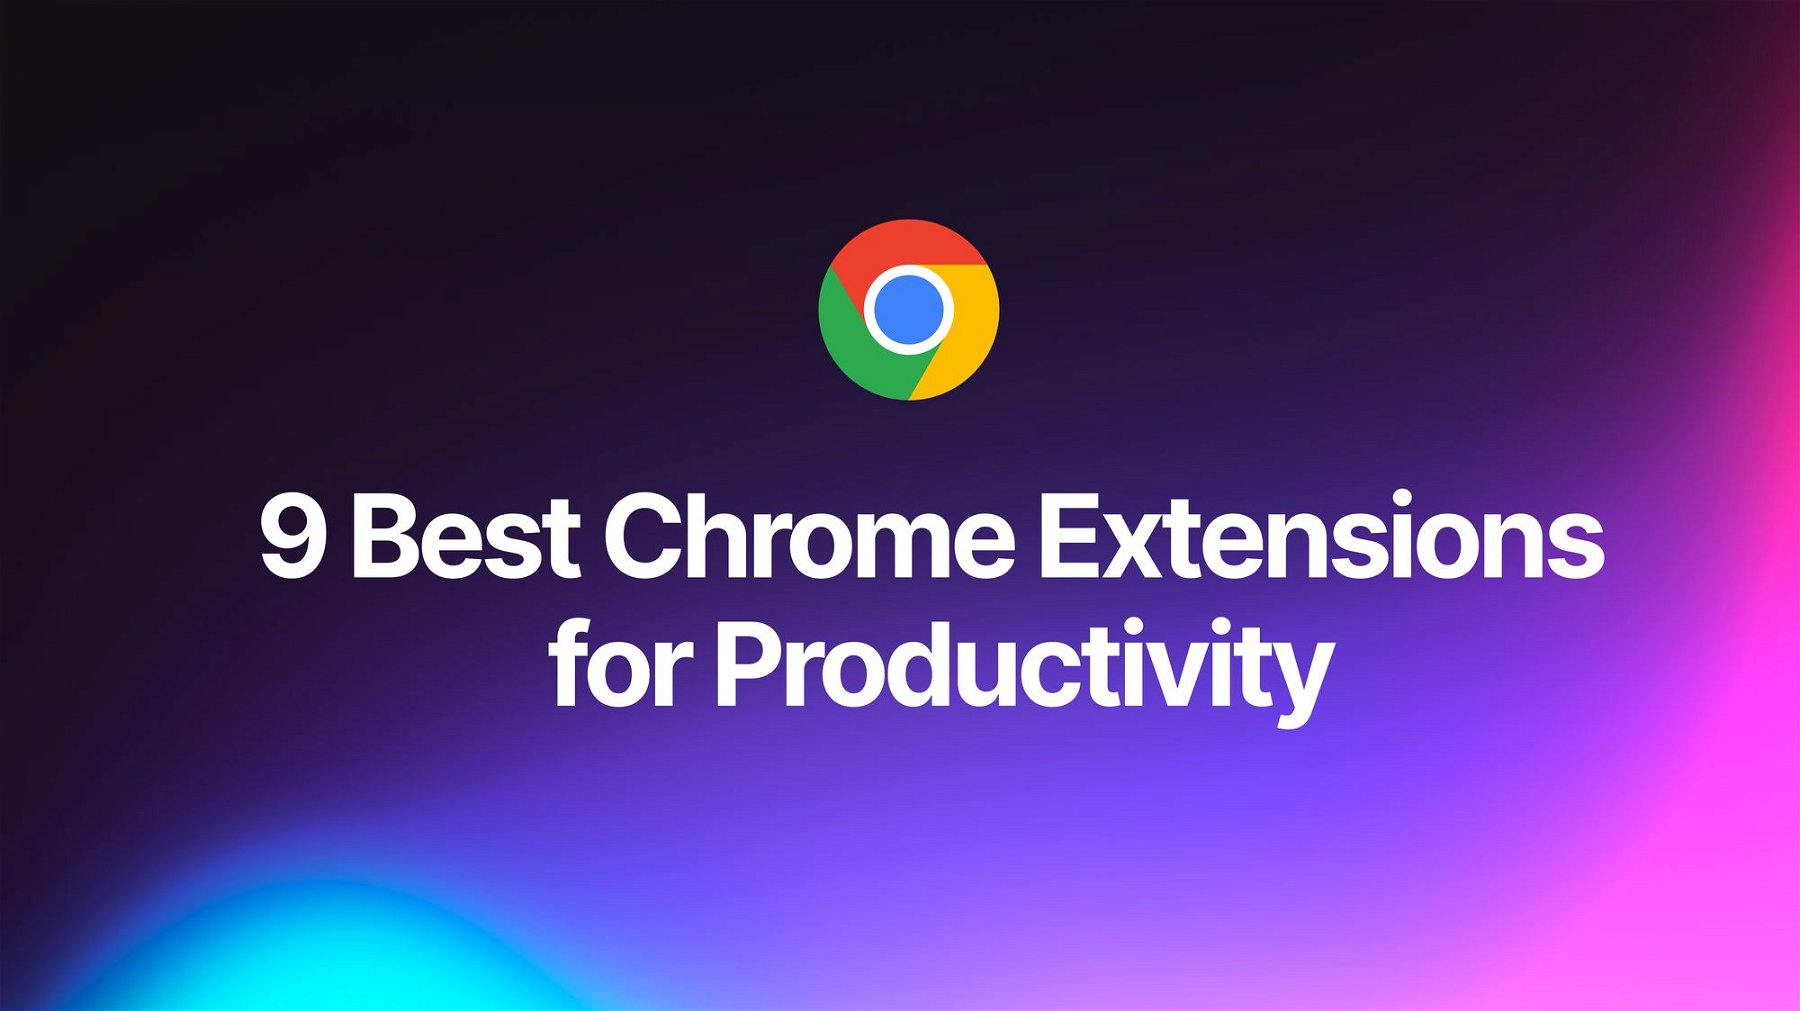 9 best Chrome Extensions for Productivity